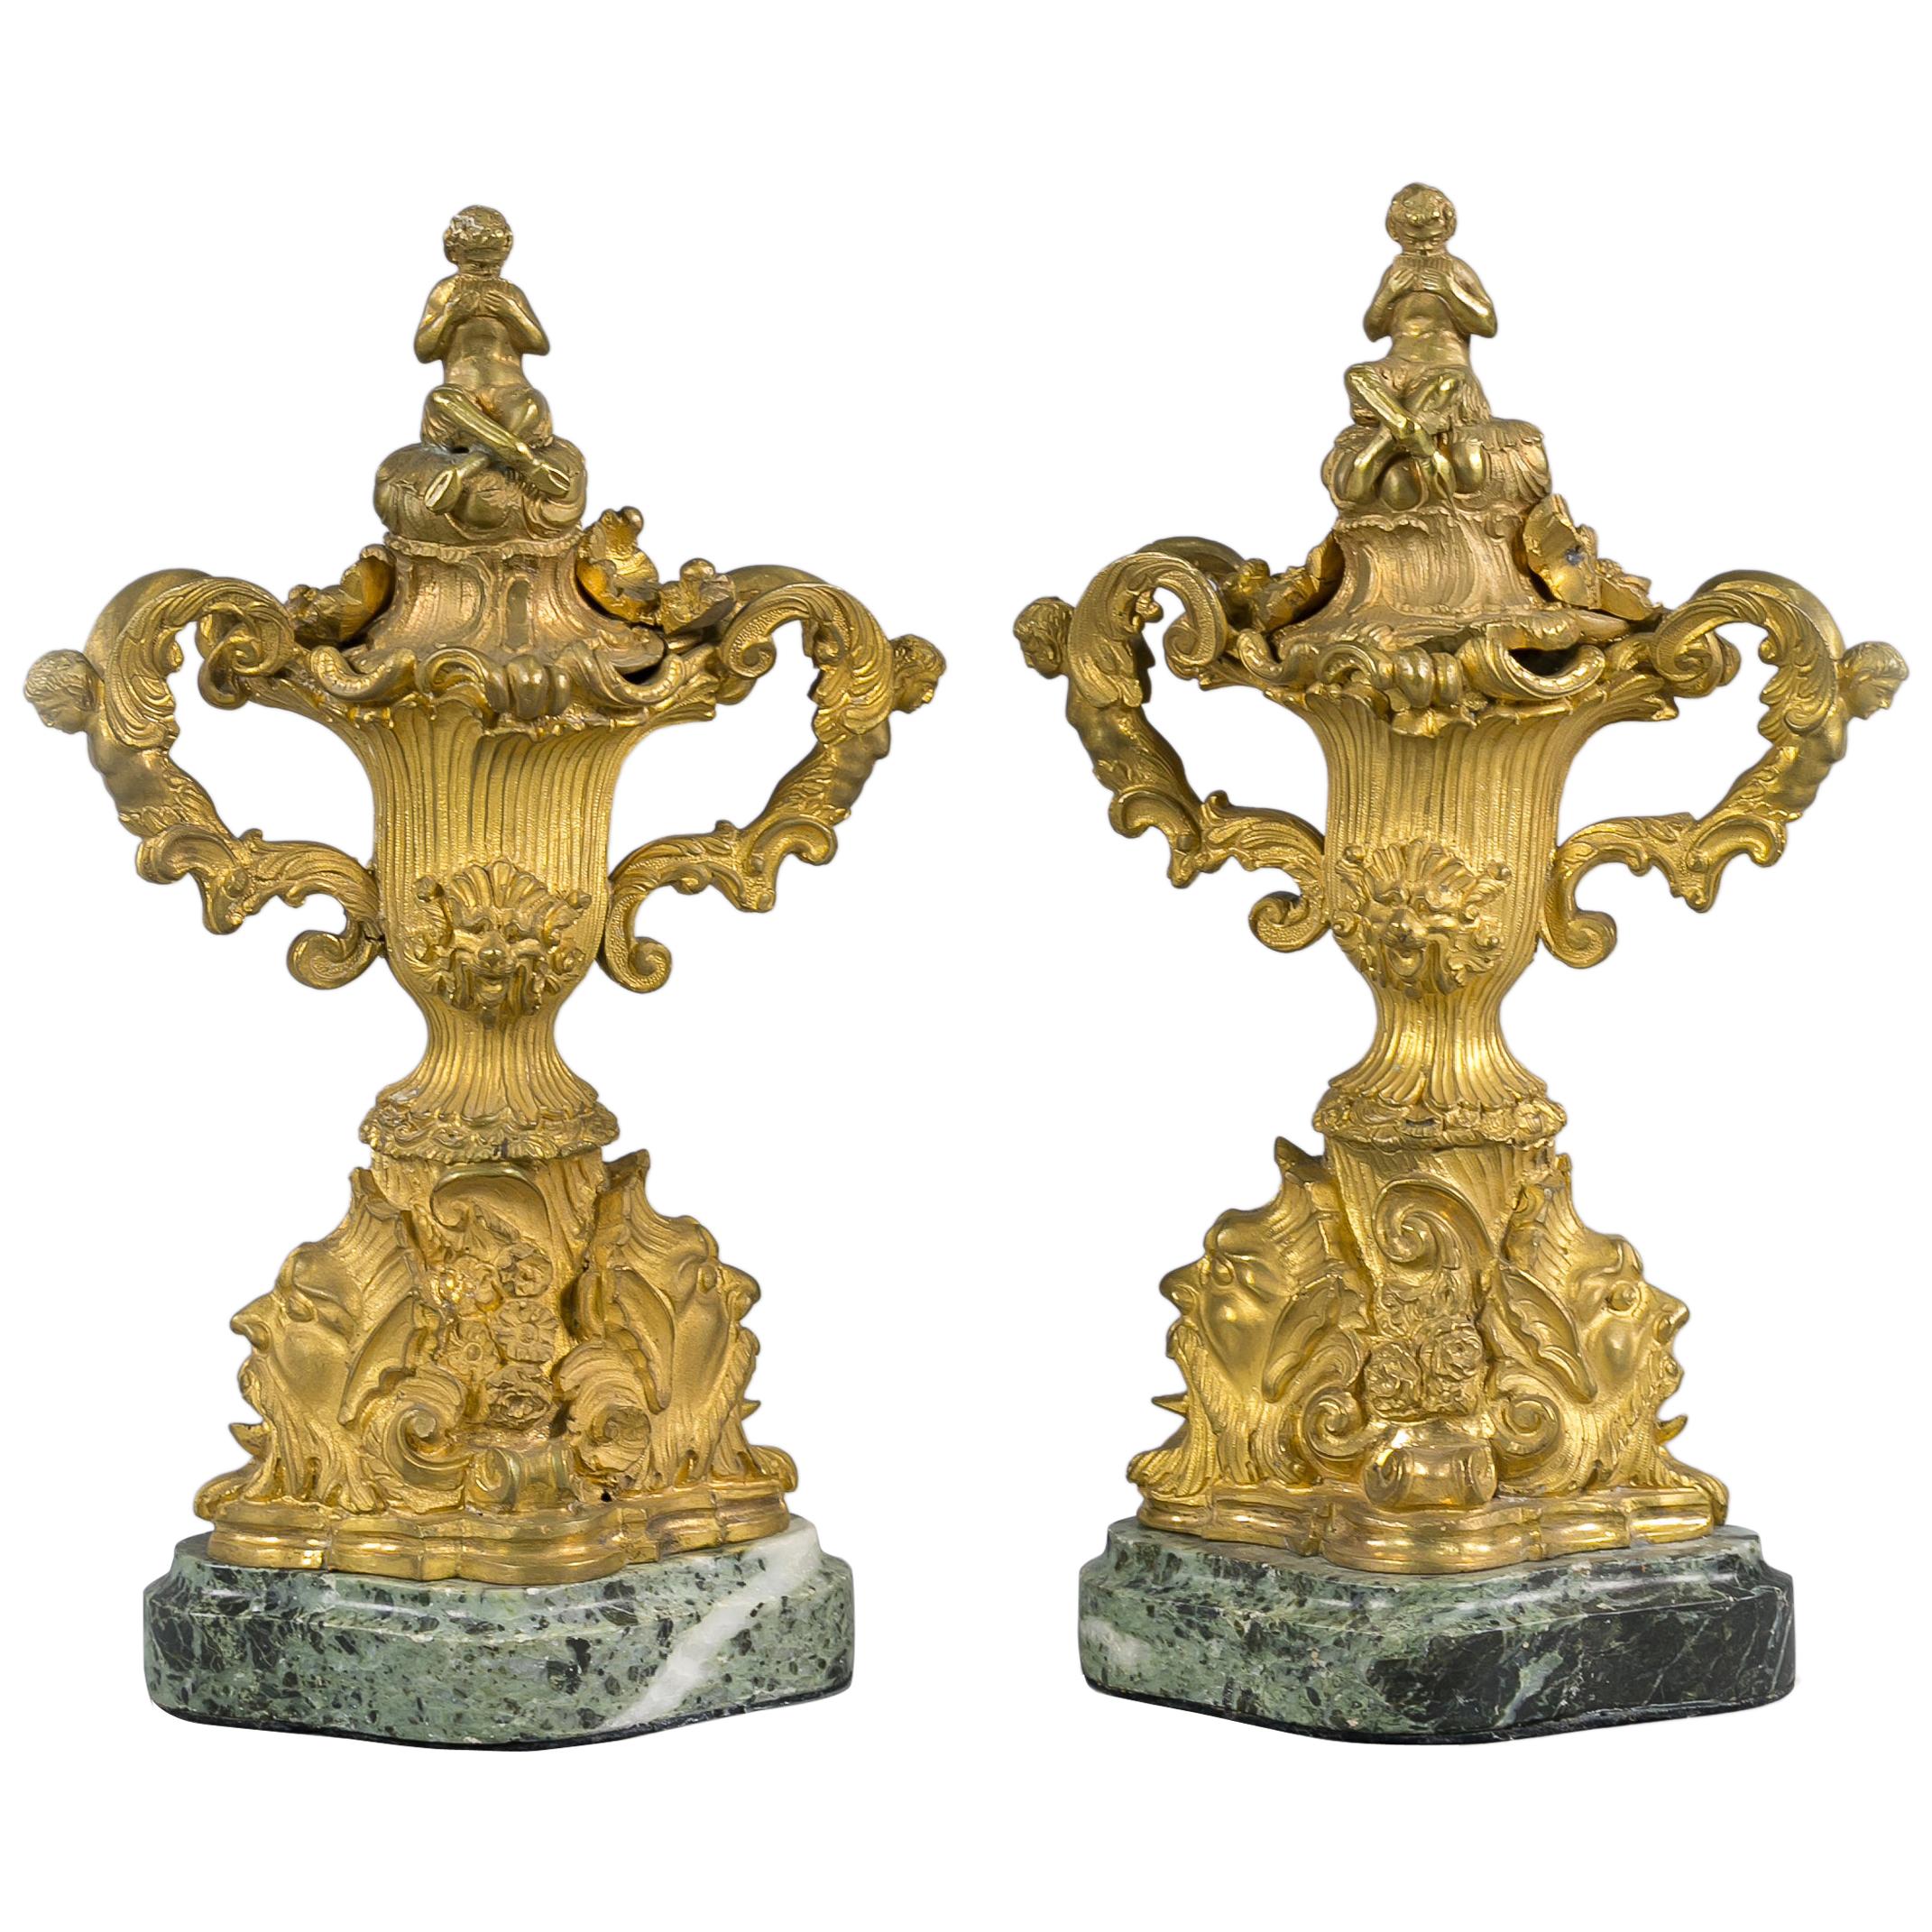 Pair of Gilt Bronze Two Handled Covered Urns on Marble Bases, French, circa 1890